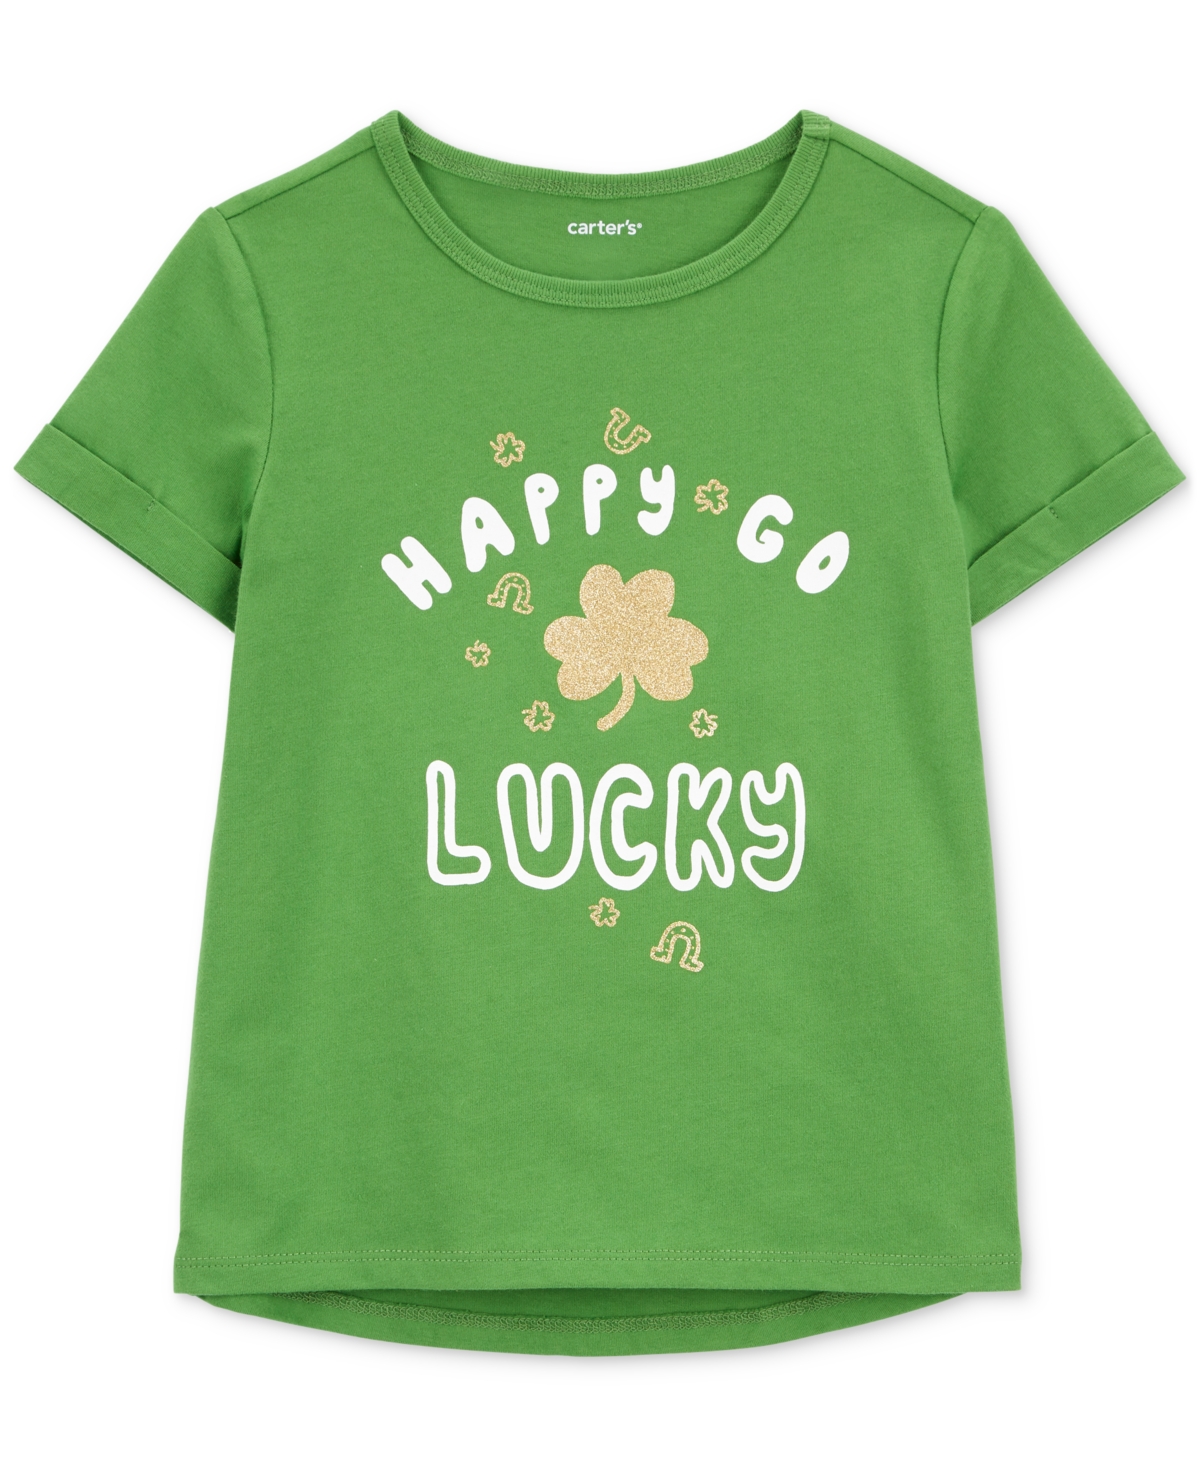 Carter's Babies' Toddler Girls Happy Go Lucky Printed T-shirt In Green